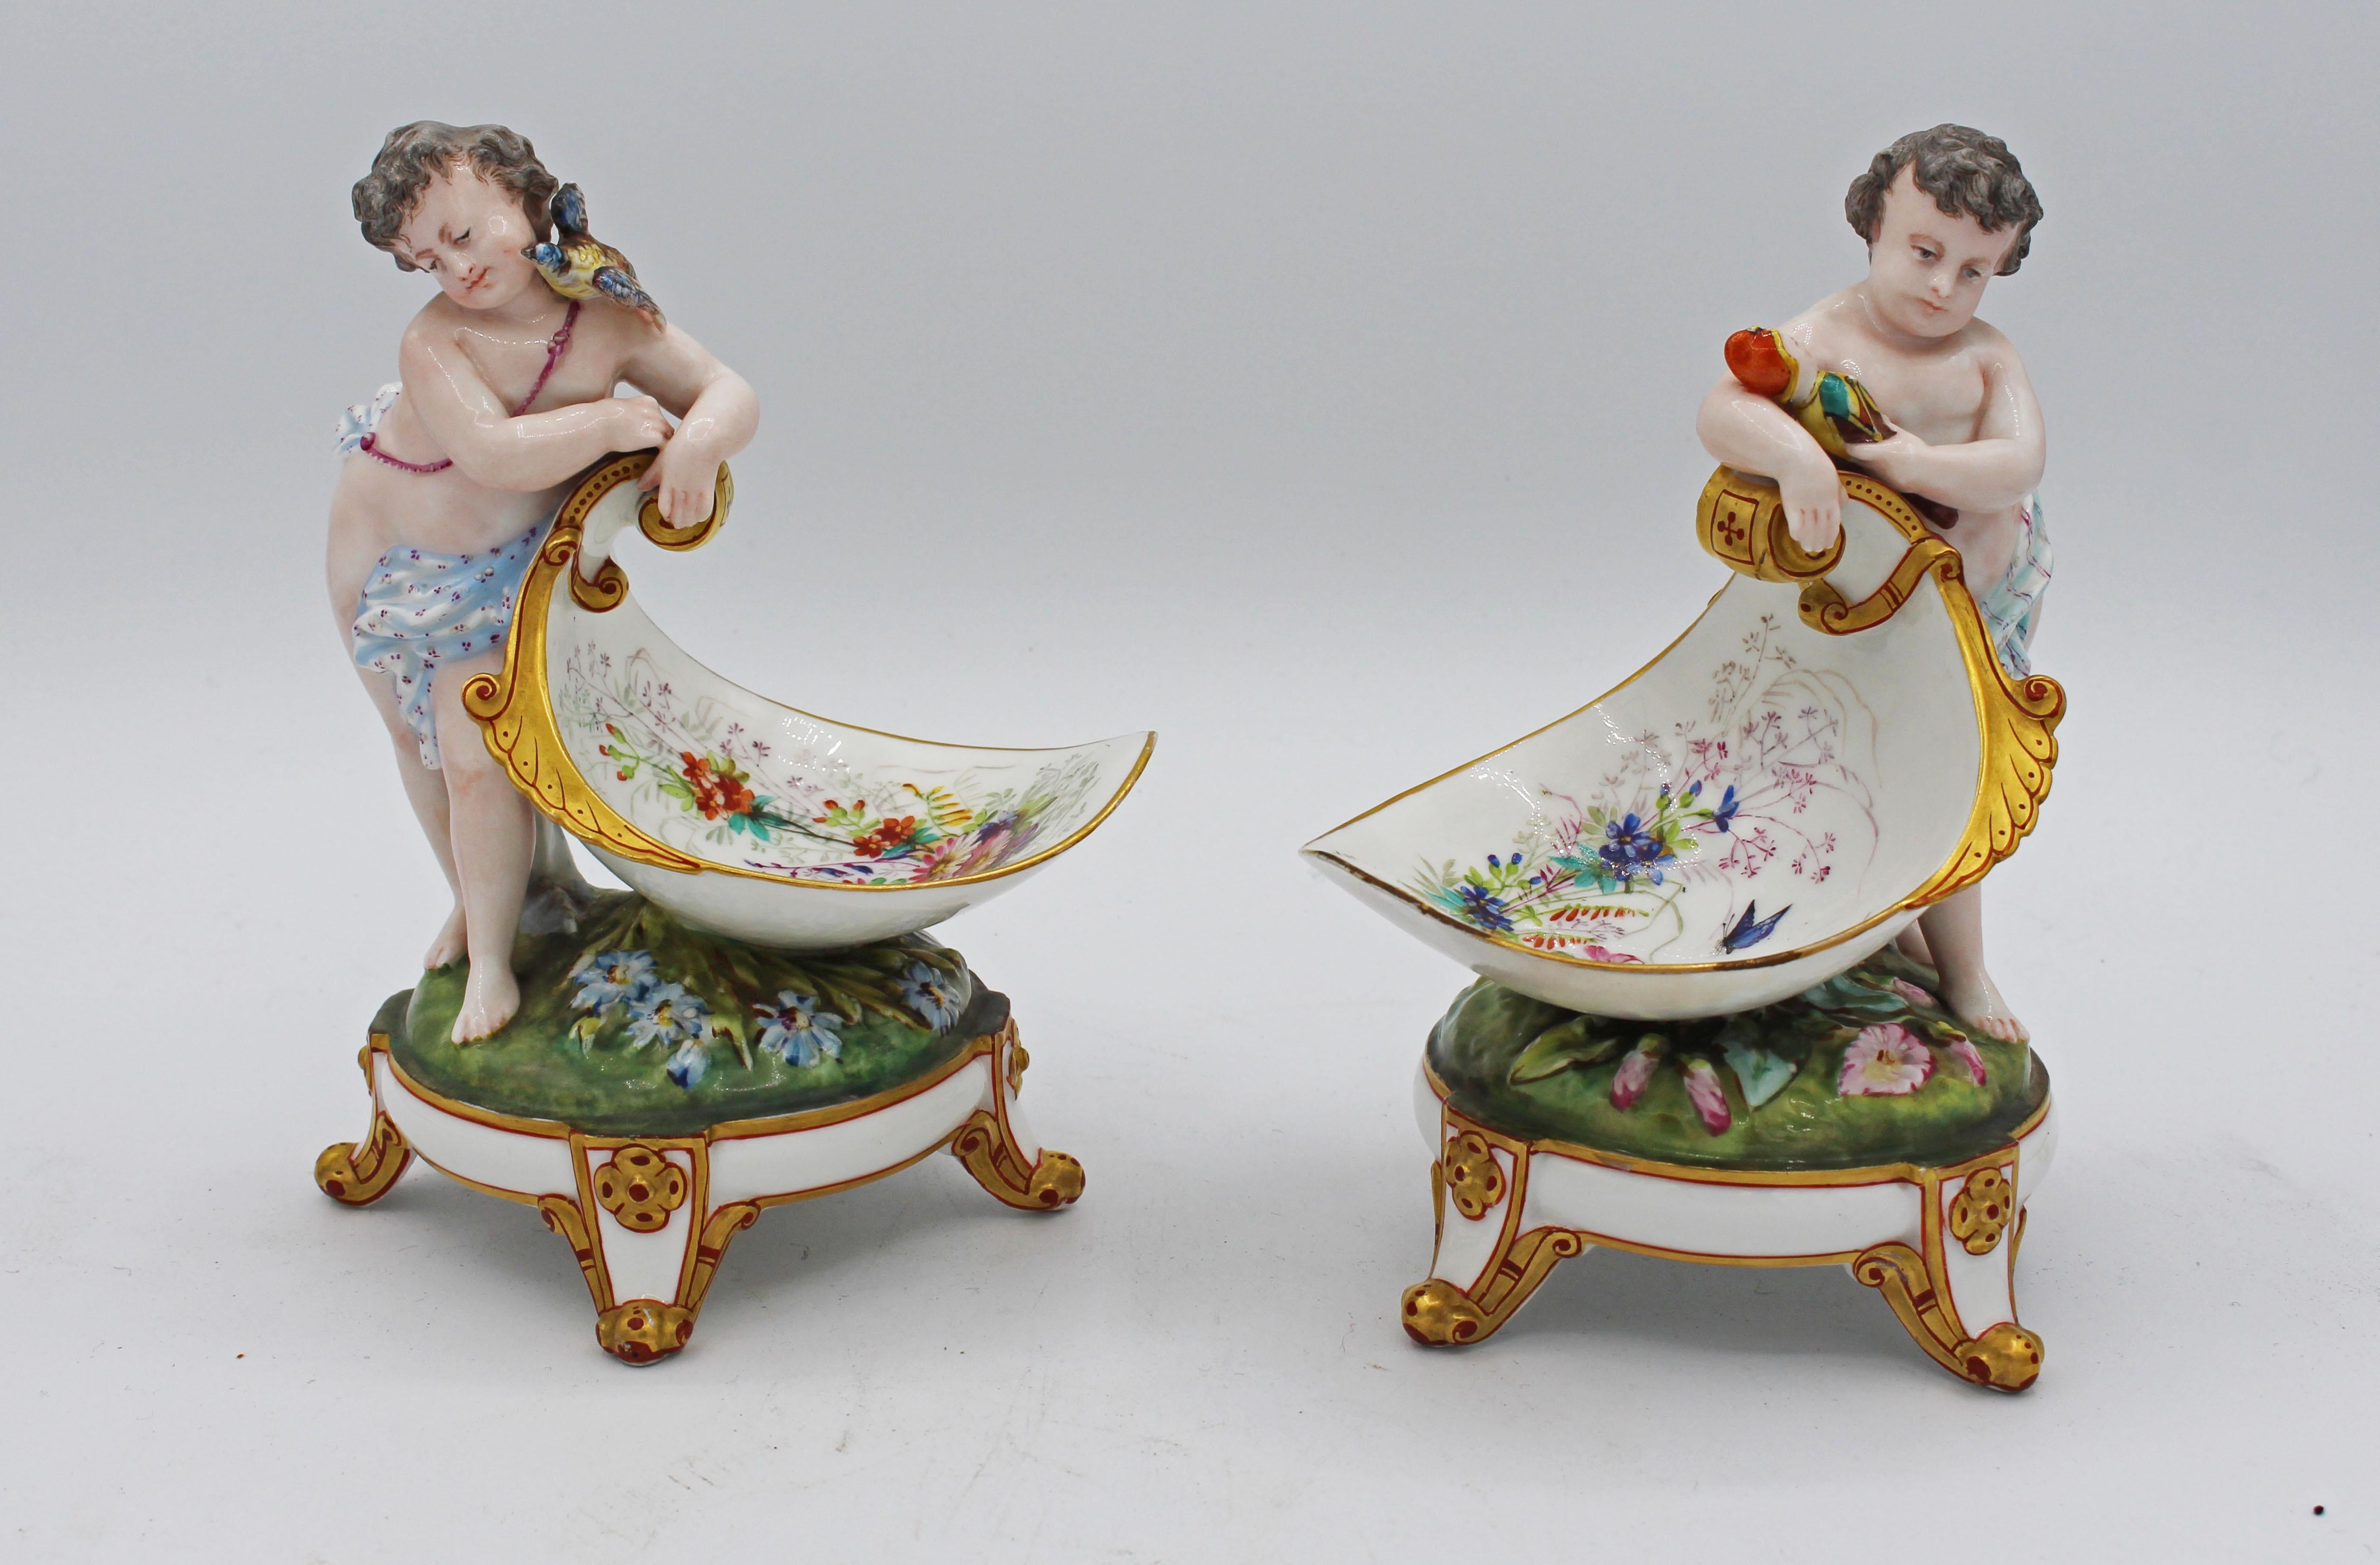 A charming pair of porcelain children figural potpourri stands, c.1880s. One child with toy soldier and one with a bird on her shoulder. English or Continental with indecipherable impressed marks. Superbly painted and gilded. One bowl has the front